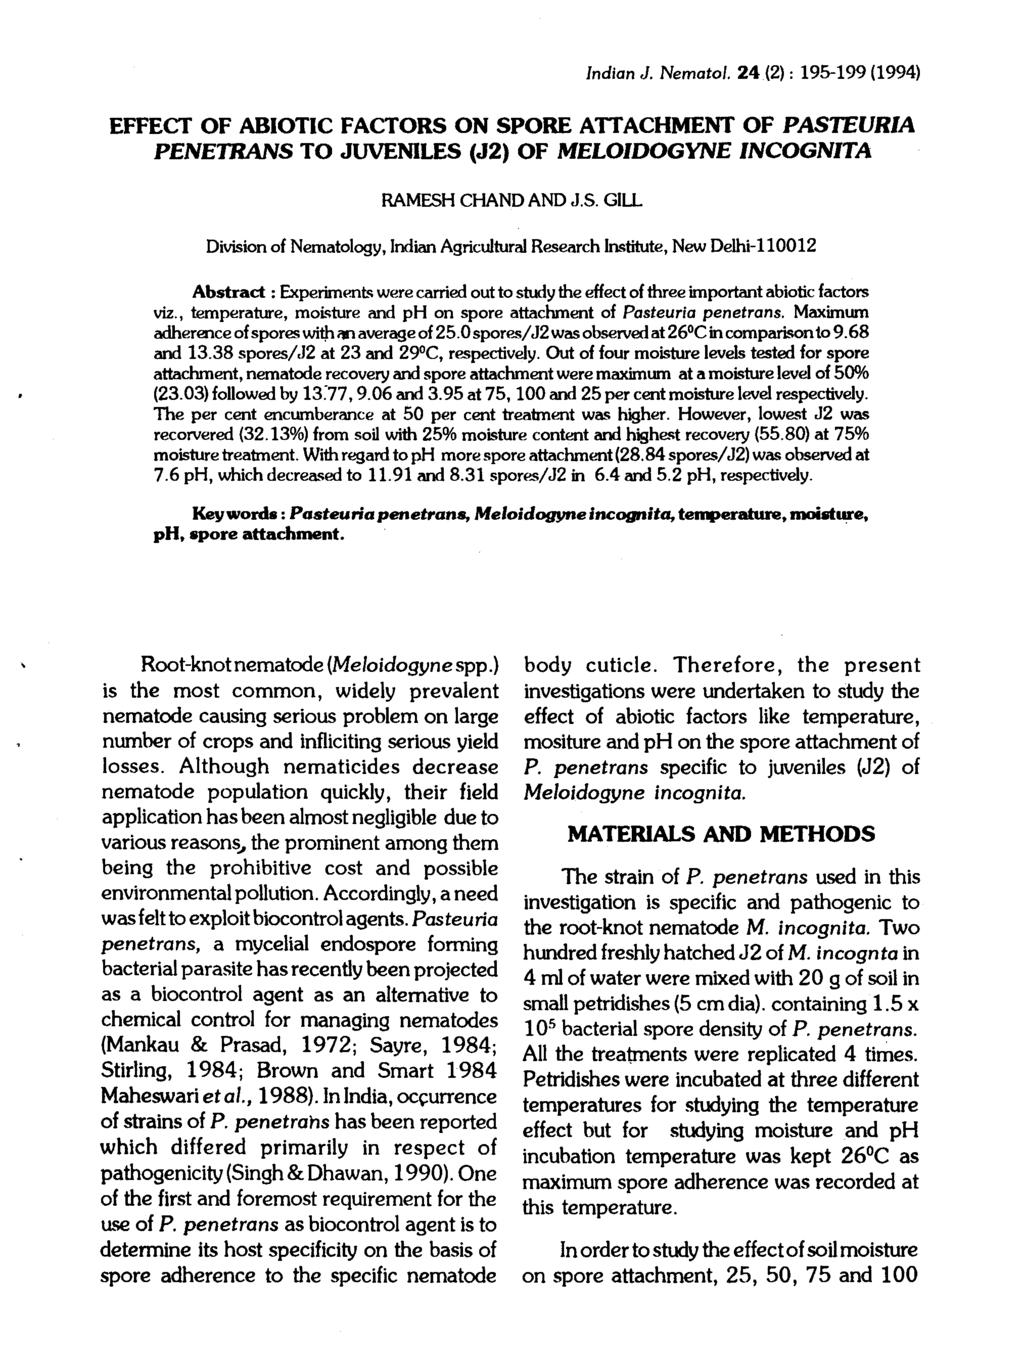 Indian J. Nemato/. 24(2): 195-199 (1994) EFFECT OF ABIOTIC FACTORS ON SPORE ATTACHMENT OF PASTEURIA PENETRANS TO JUVENILES (J2) OF MELOIDOGYNE INCOGNITA RAMESH CHAND AND J.S. GIll.